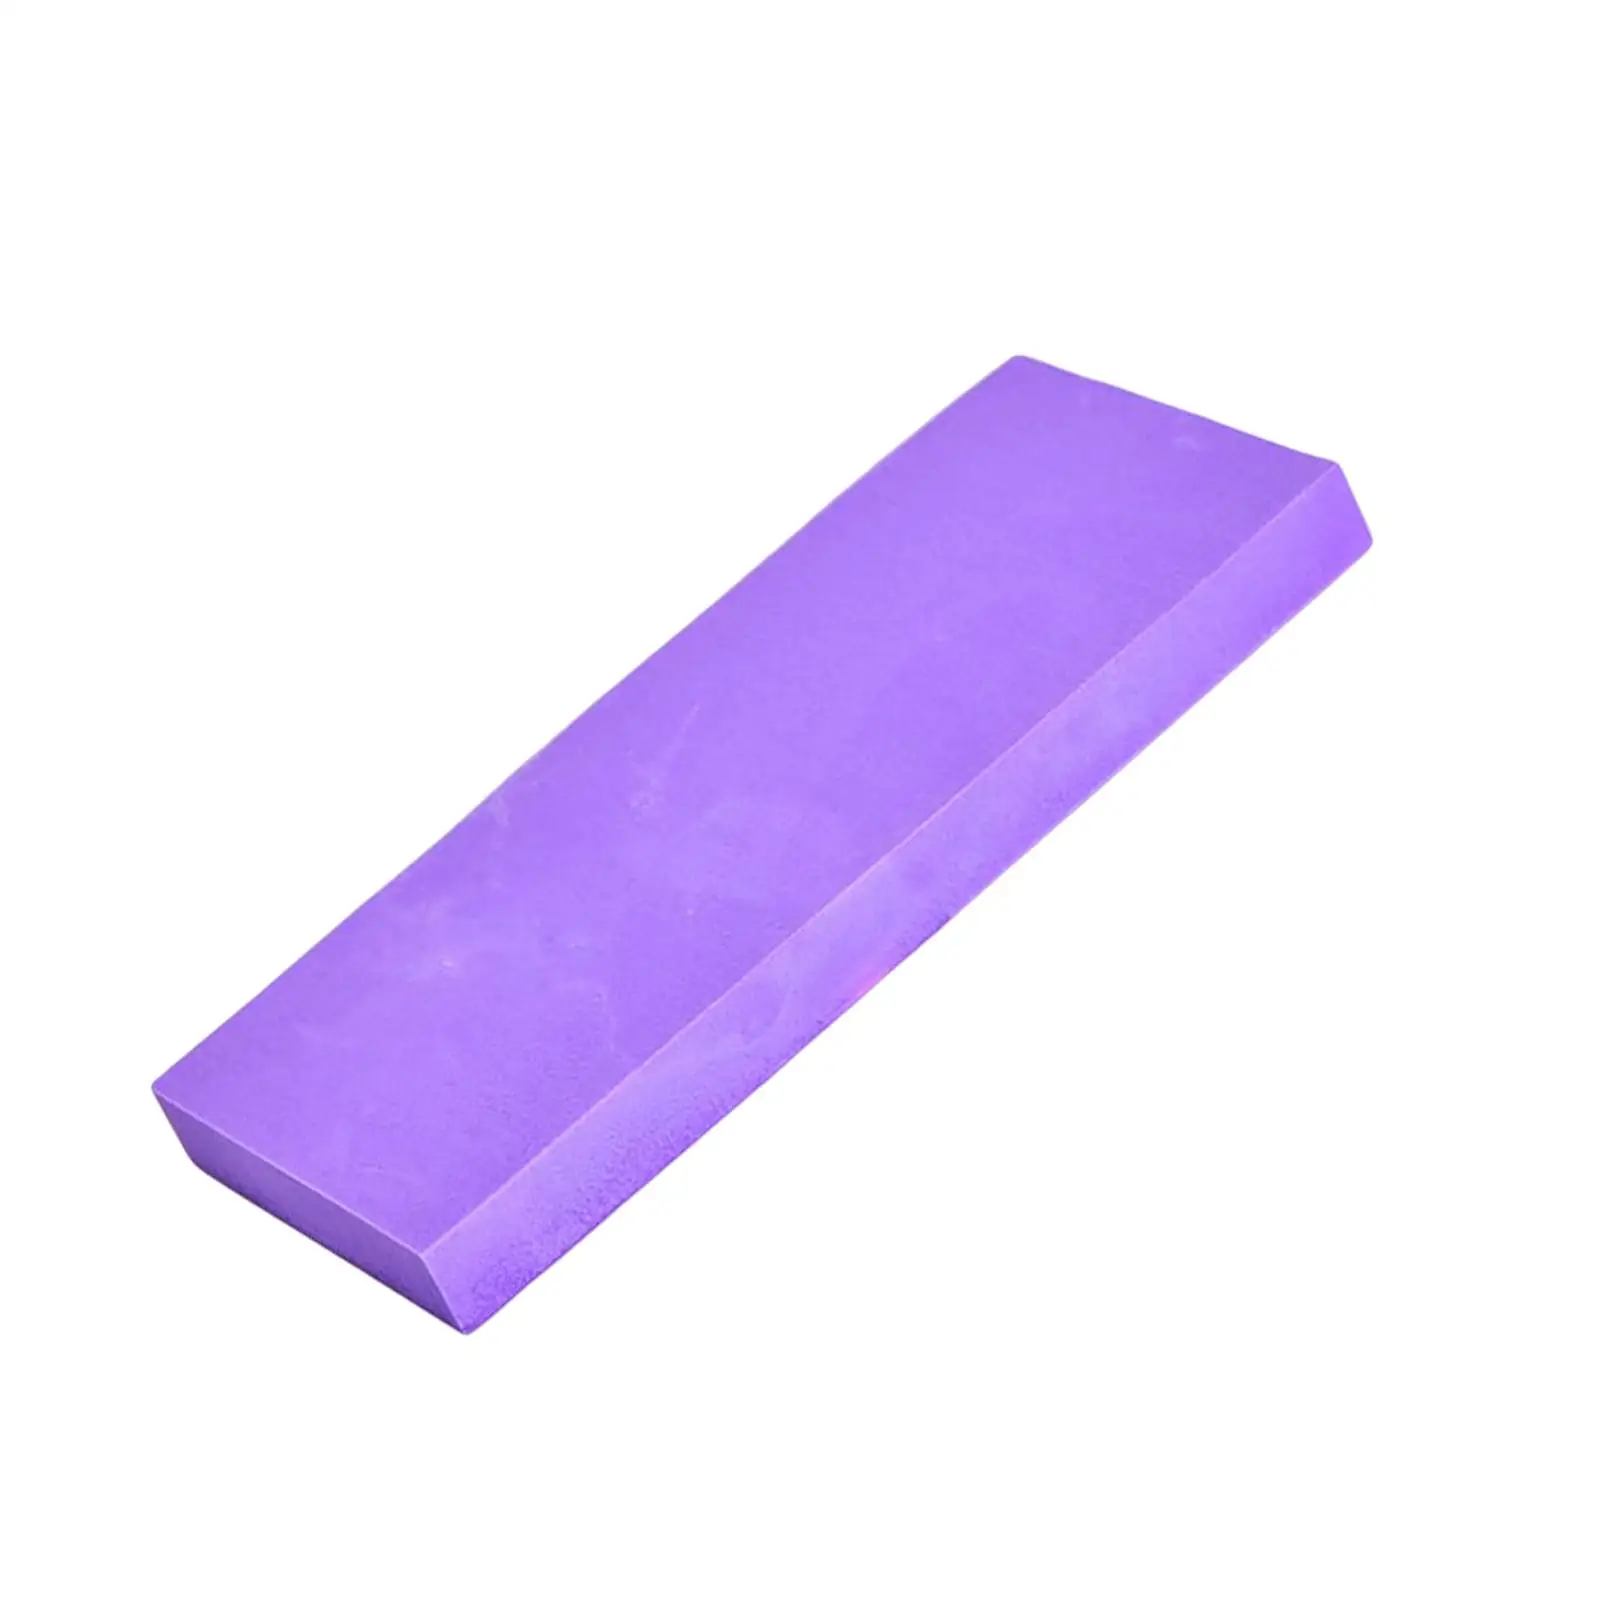 Strong Water Absorbing Sponge Ceramic Art Tool Cleaning Sponge for Ceramic Craft Shaping